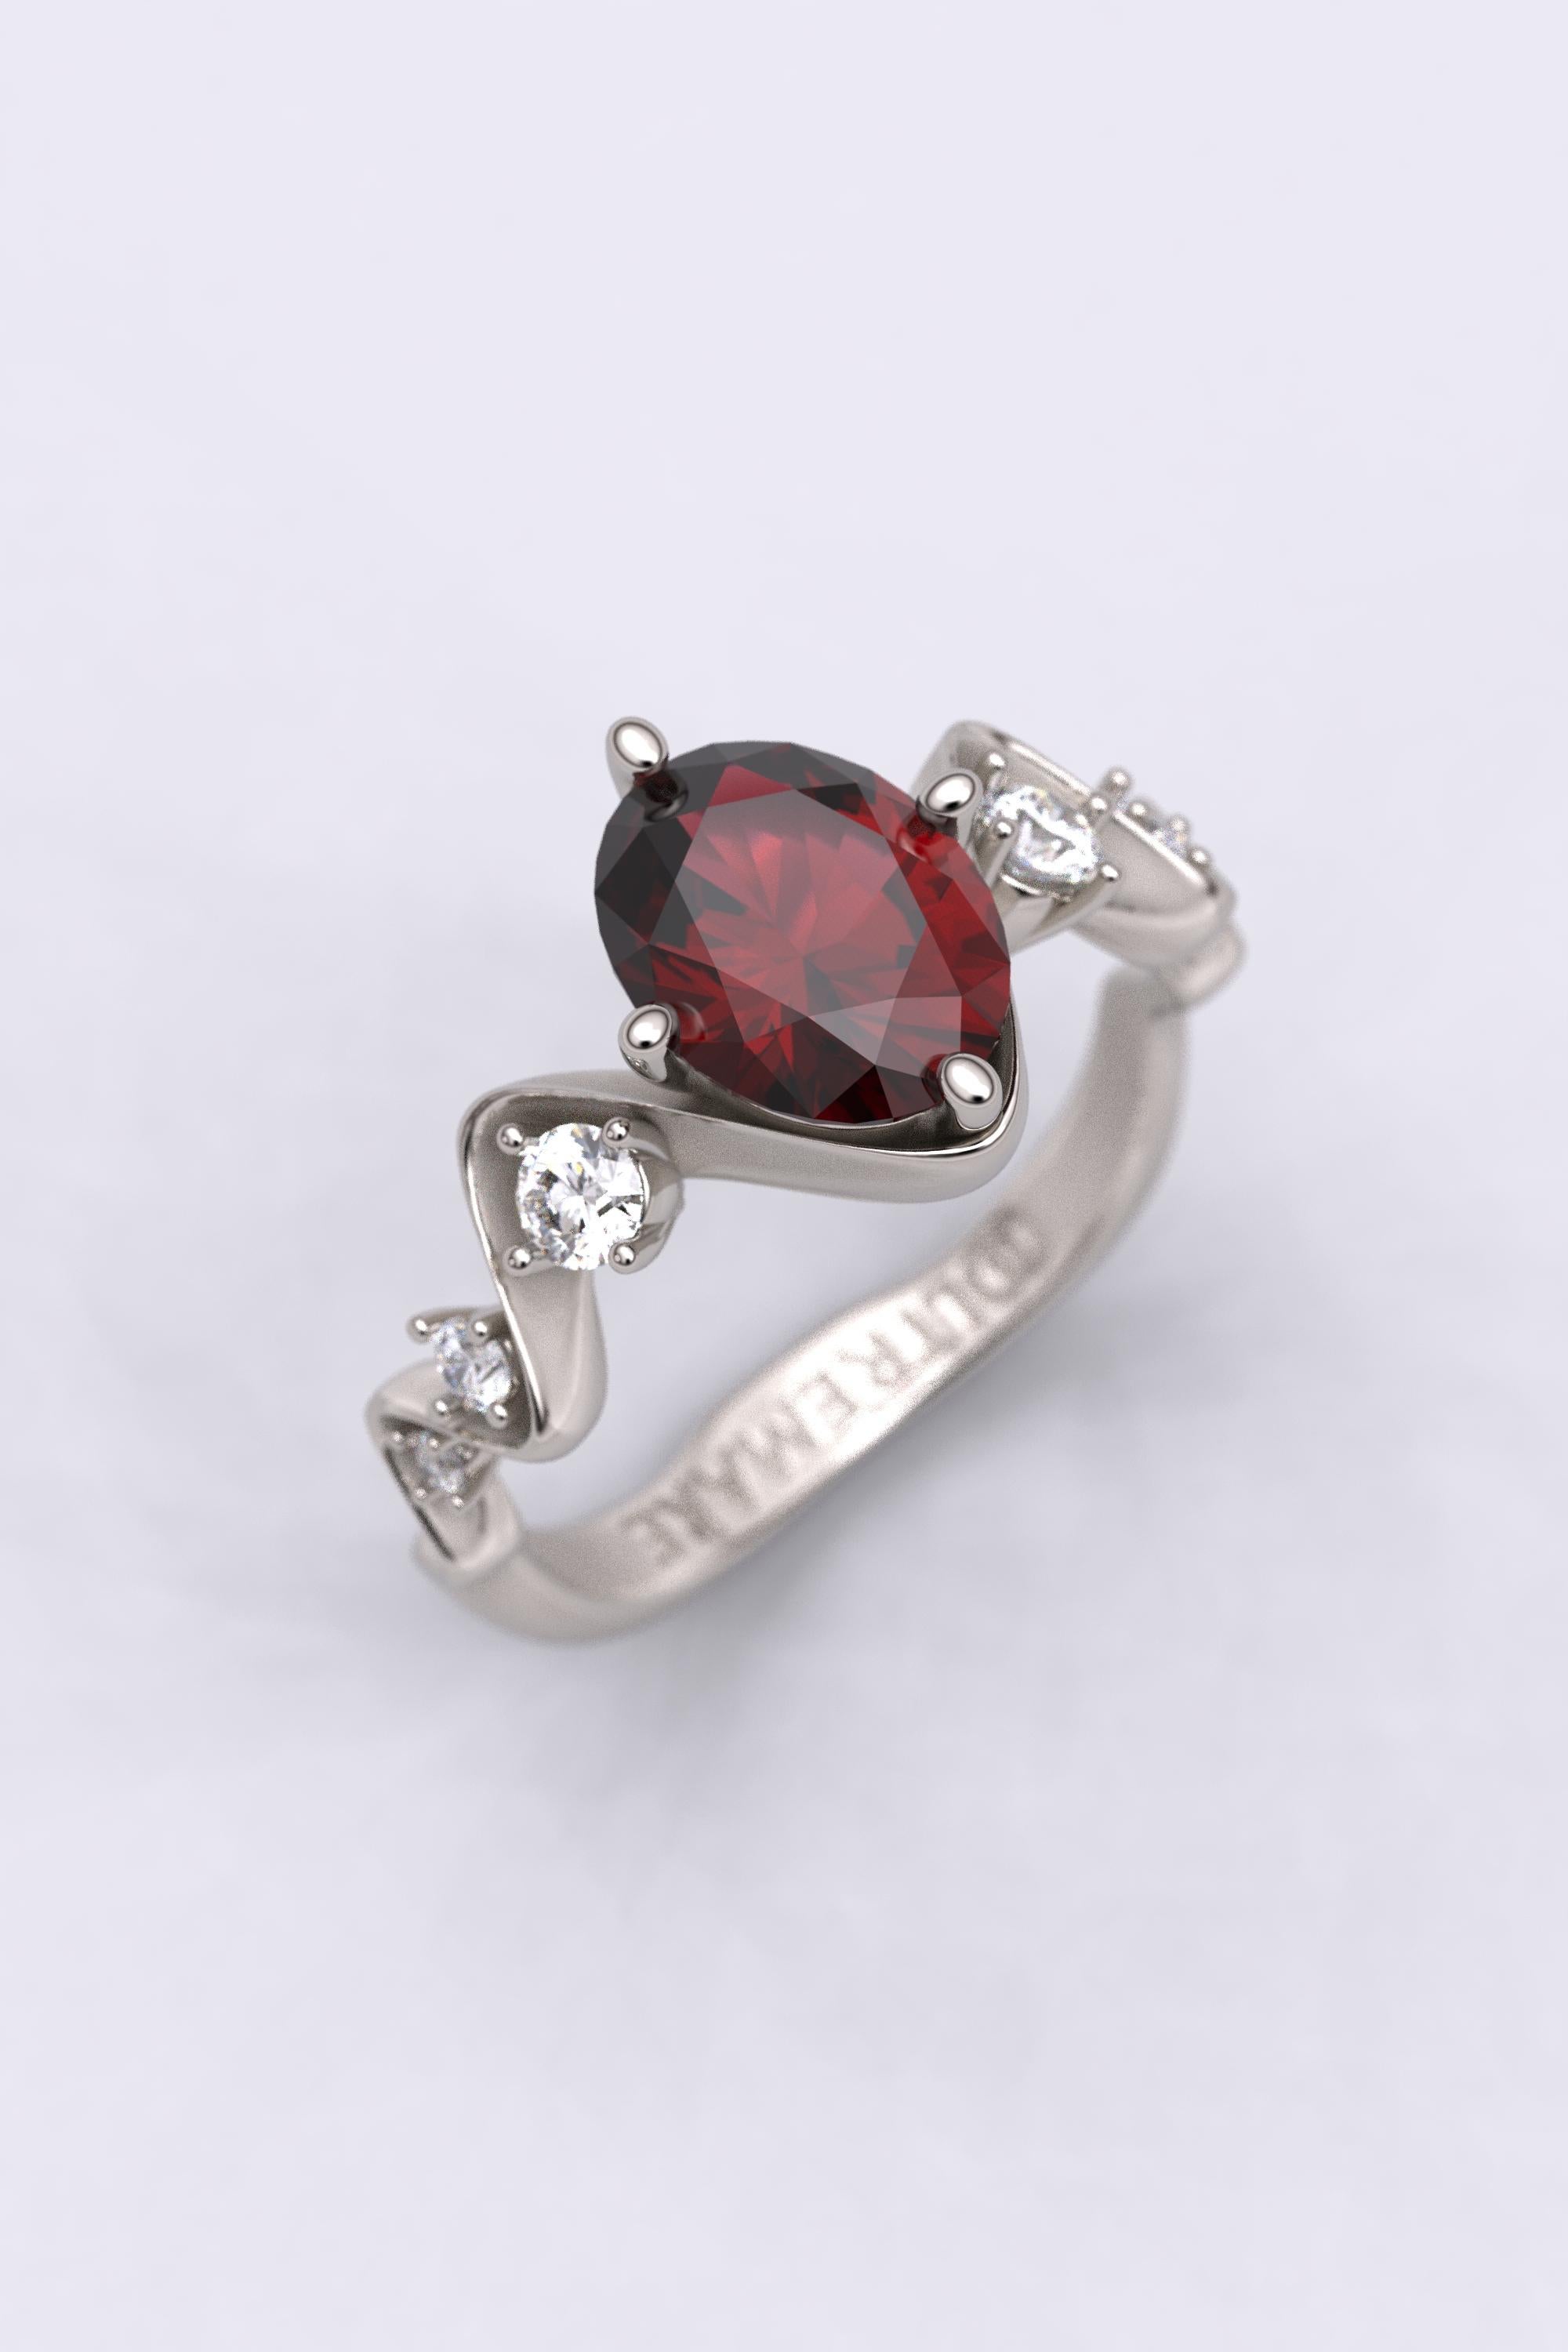 For Sale:  Natural Garnet and Diamonds Italian 14k Gold Engagement Ring, Oltremare Gioielli 2